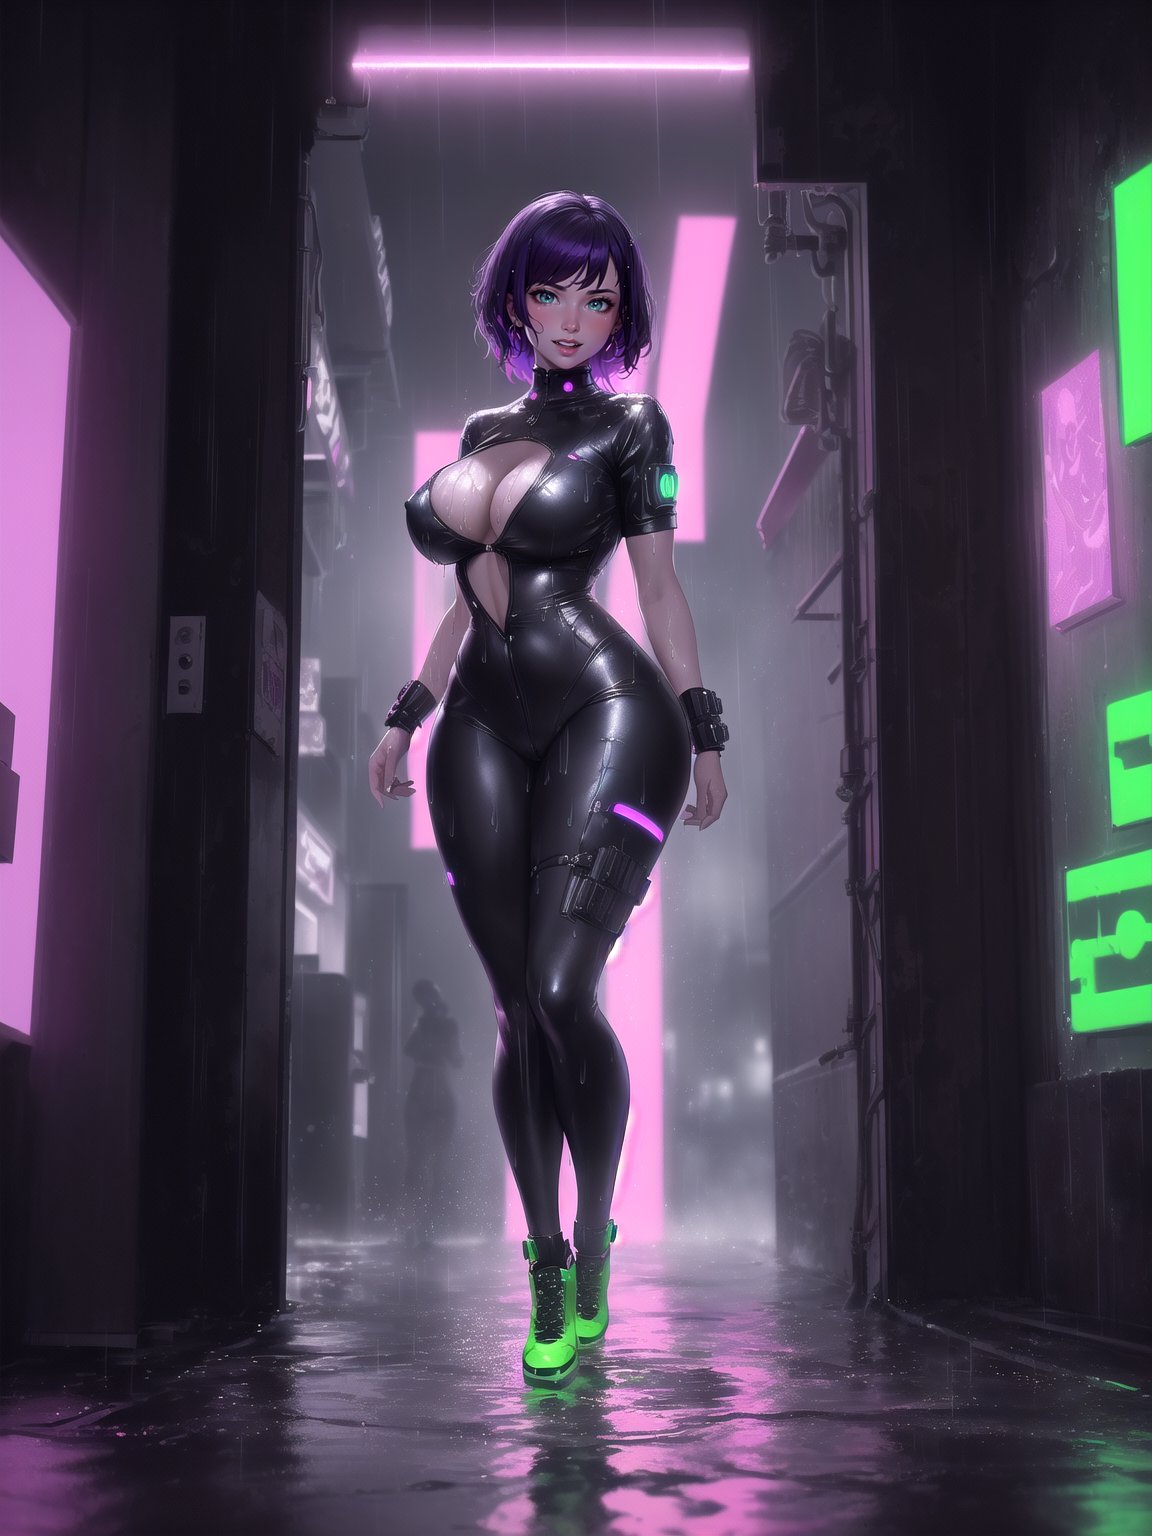 ((Full body):2) {((30 year old woman only):2)}:{((wearing black cyberpunk costume with neon lights extremely tight and tight on the body, semi transparent):1.5), (( extremely large breasts):1.5), only she has ((very short purple hair, green eyes):1.5), ((looking at viewer, maniacal smile):1.5), She has ((body/suit all soaked of water):1.5) she is doing ((erotic pose):1.5)}; {Background:In a futuristic city raining heavily, (in front of the entrance to a party club with several people in line):1.3)}, Hyperrealism, 16k, ((best quality, high details):1.4), anatomically correct , masterpiece, UHD